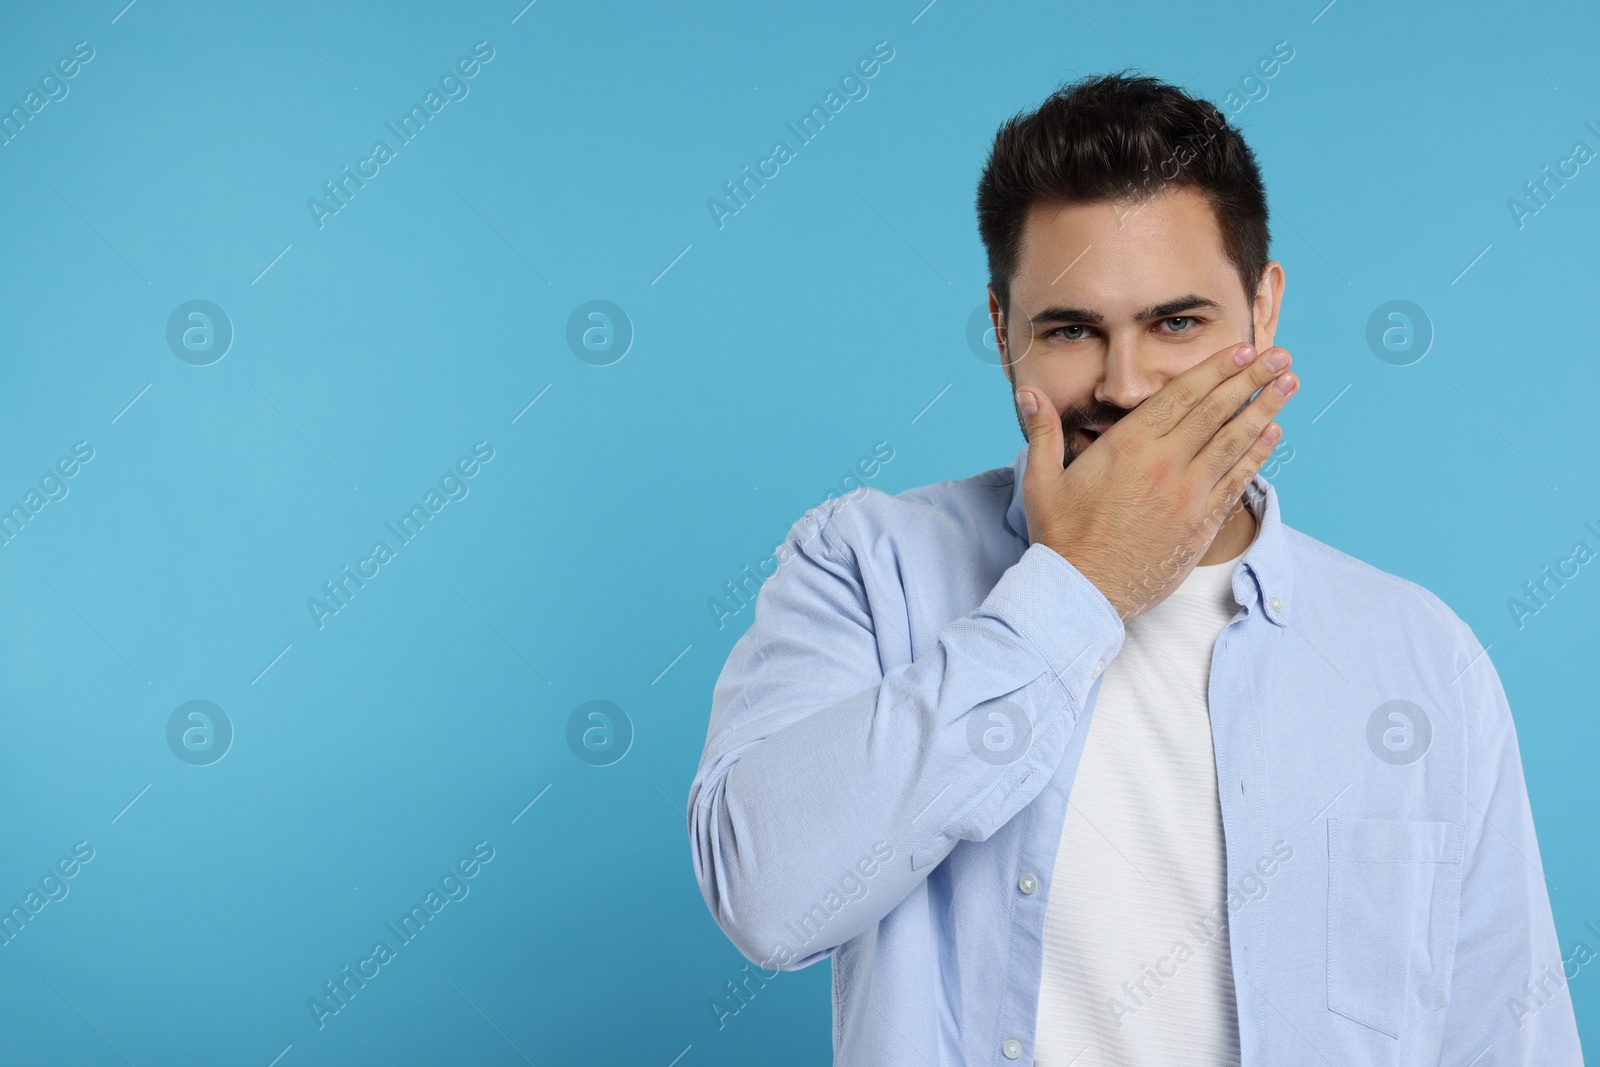 Photo of Embarrassed man covering mouth on light blue background. Space for text